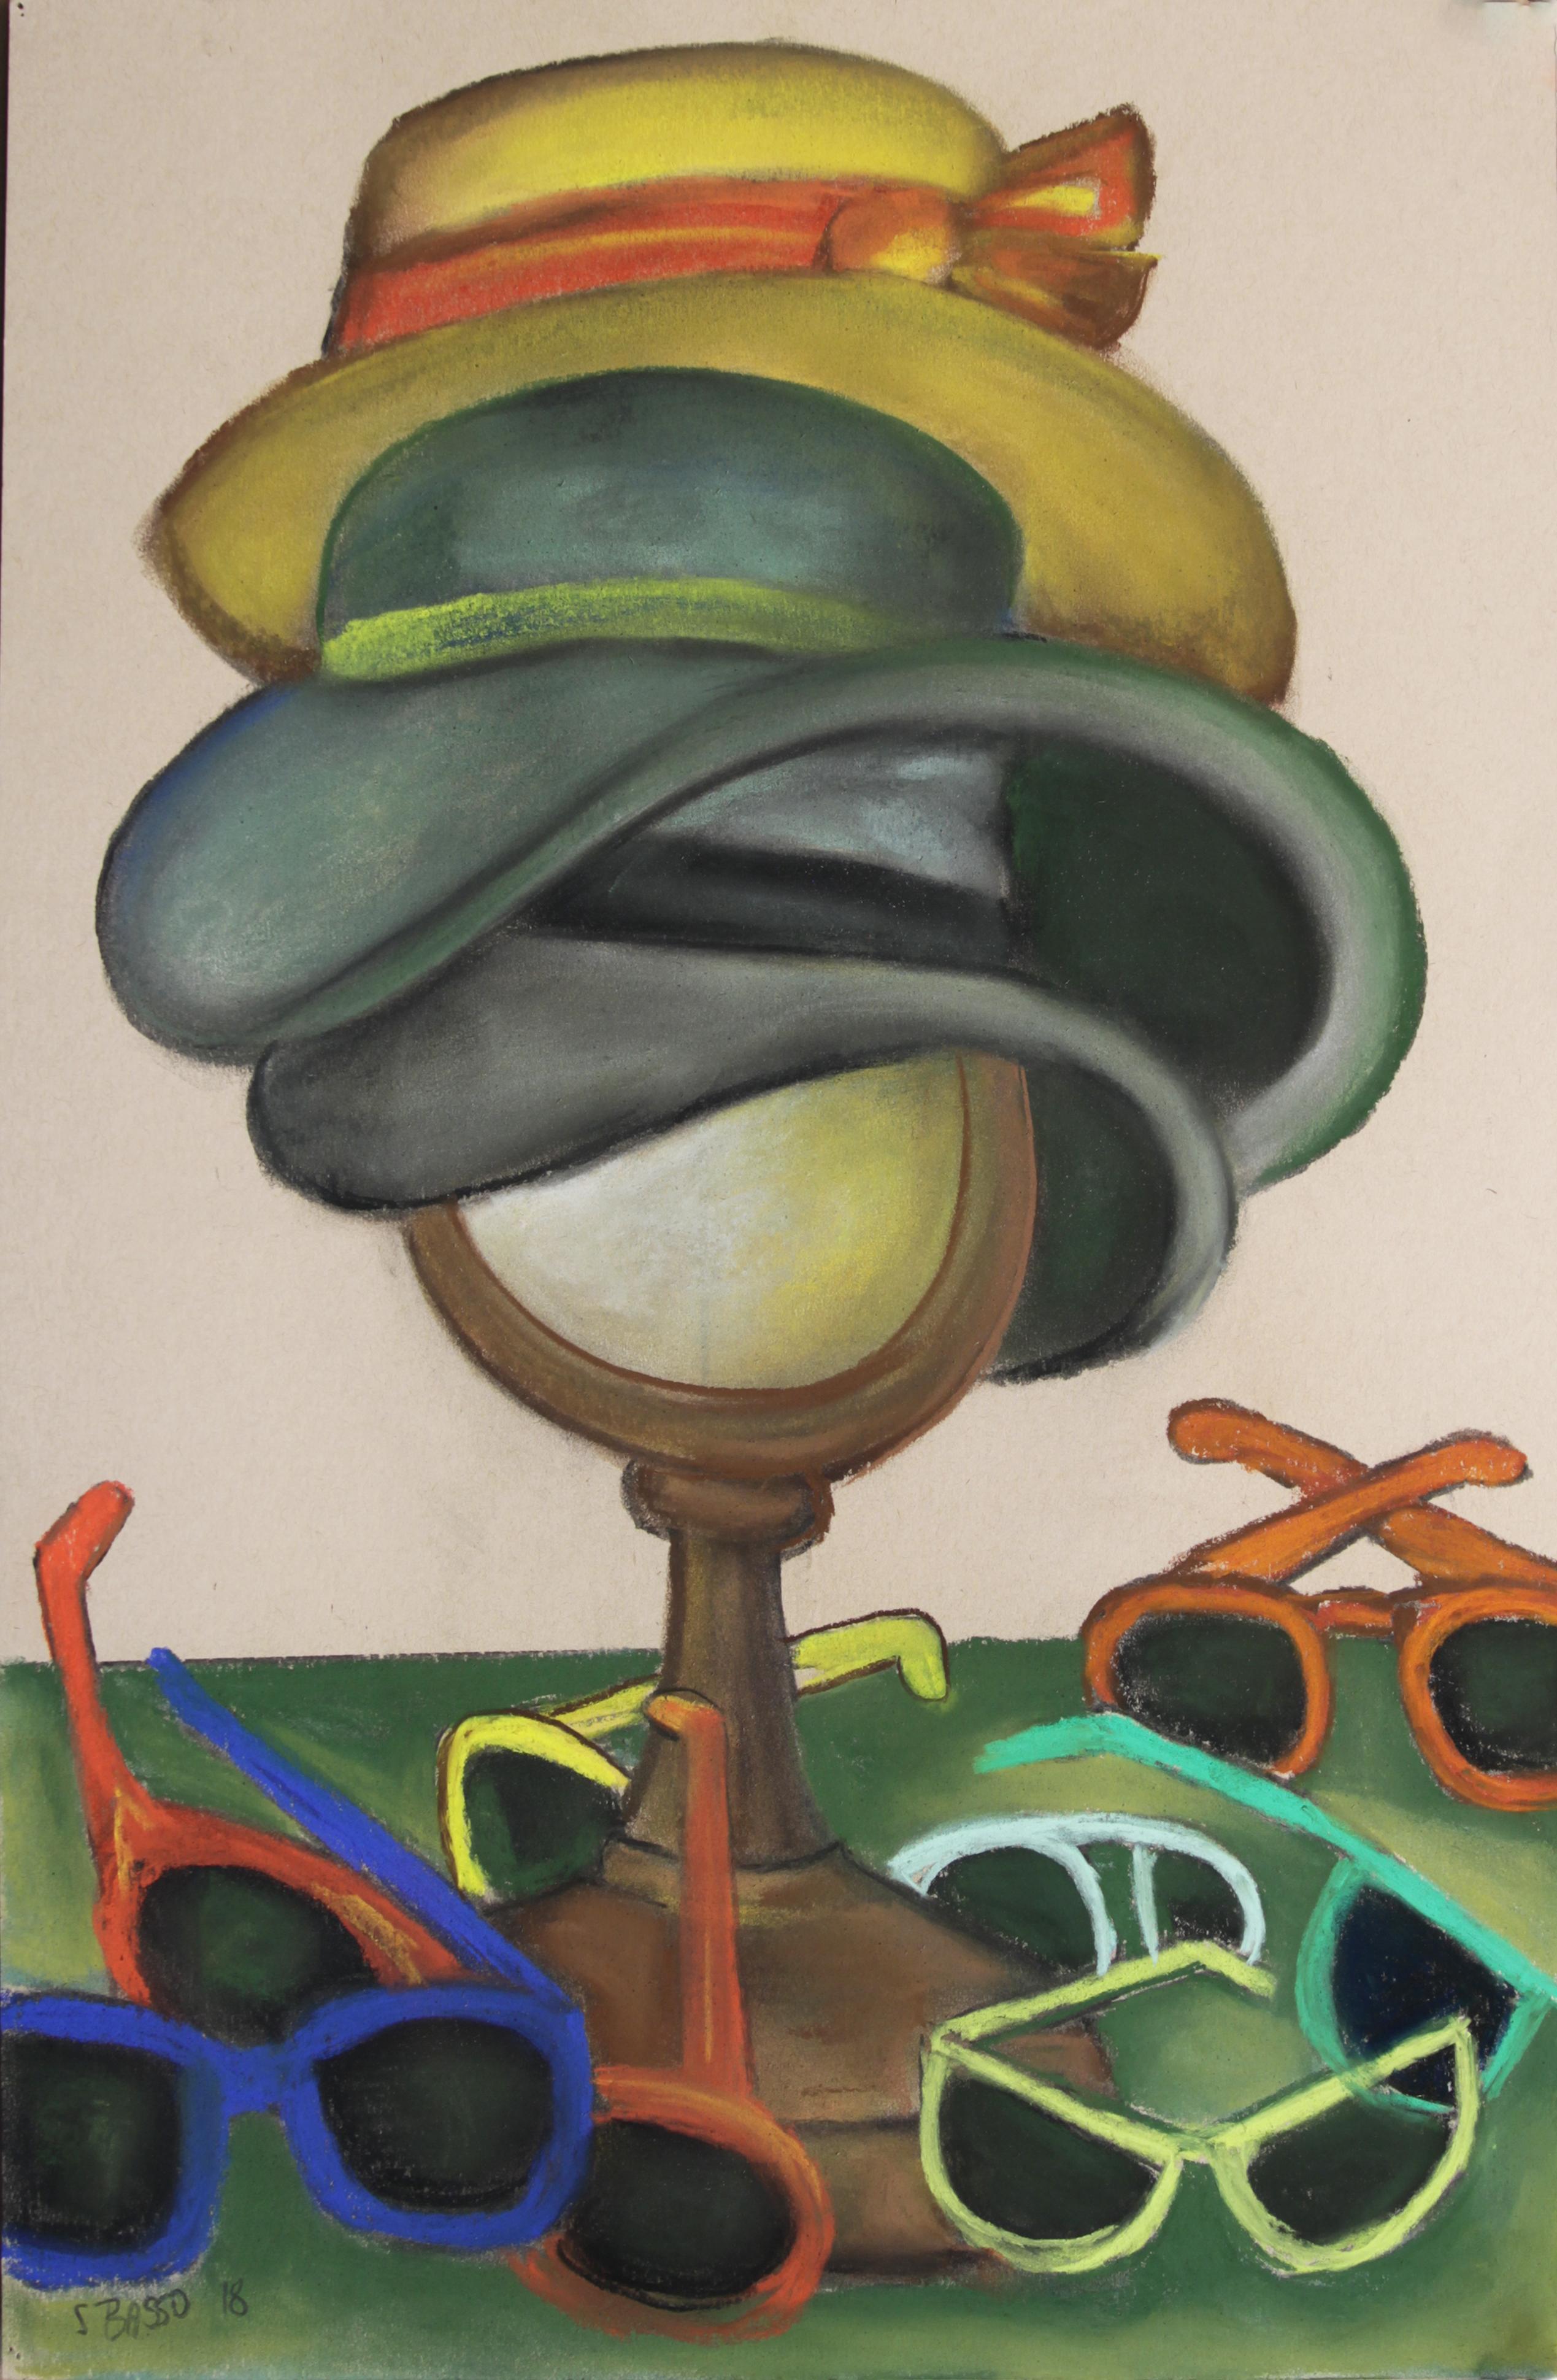 Tower of Glamour fanciful still life hats mirror and colorful sunglasses